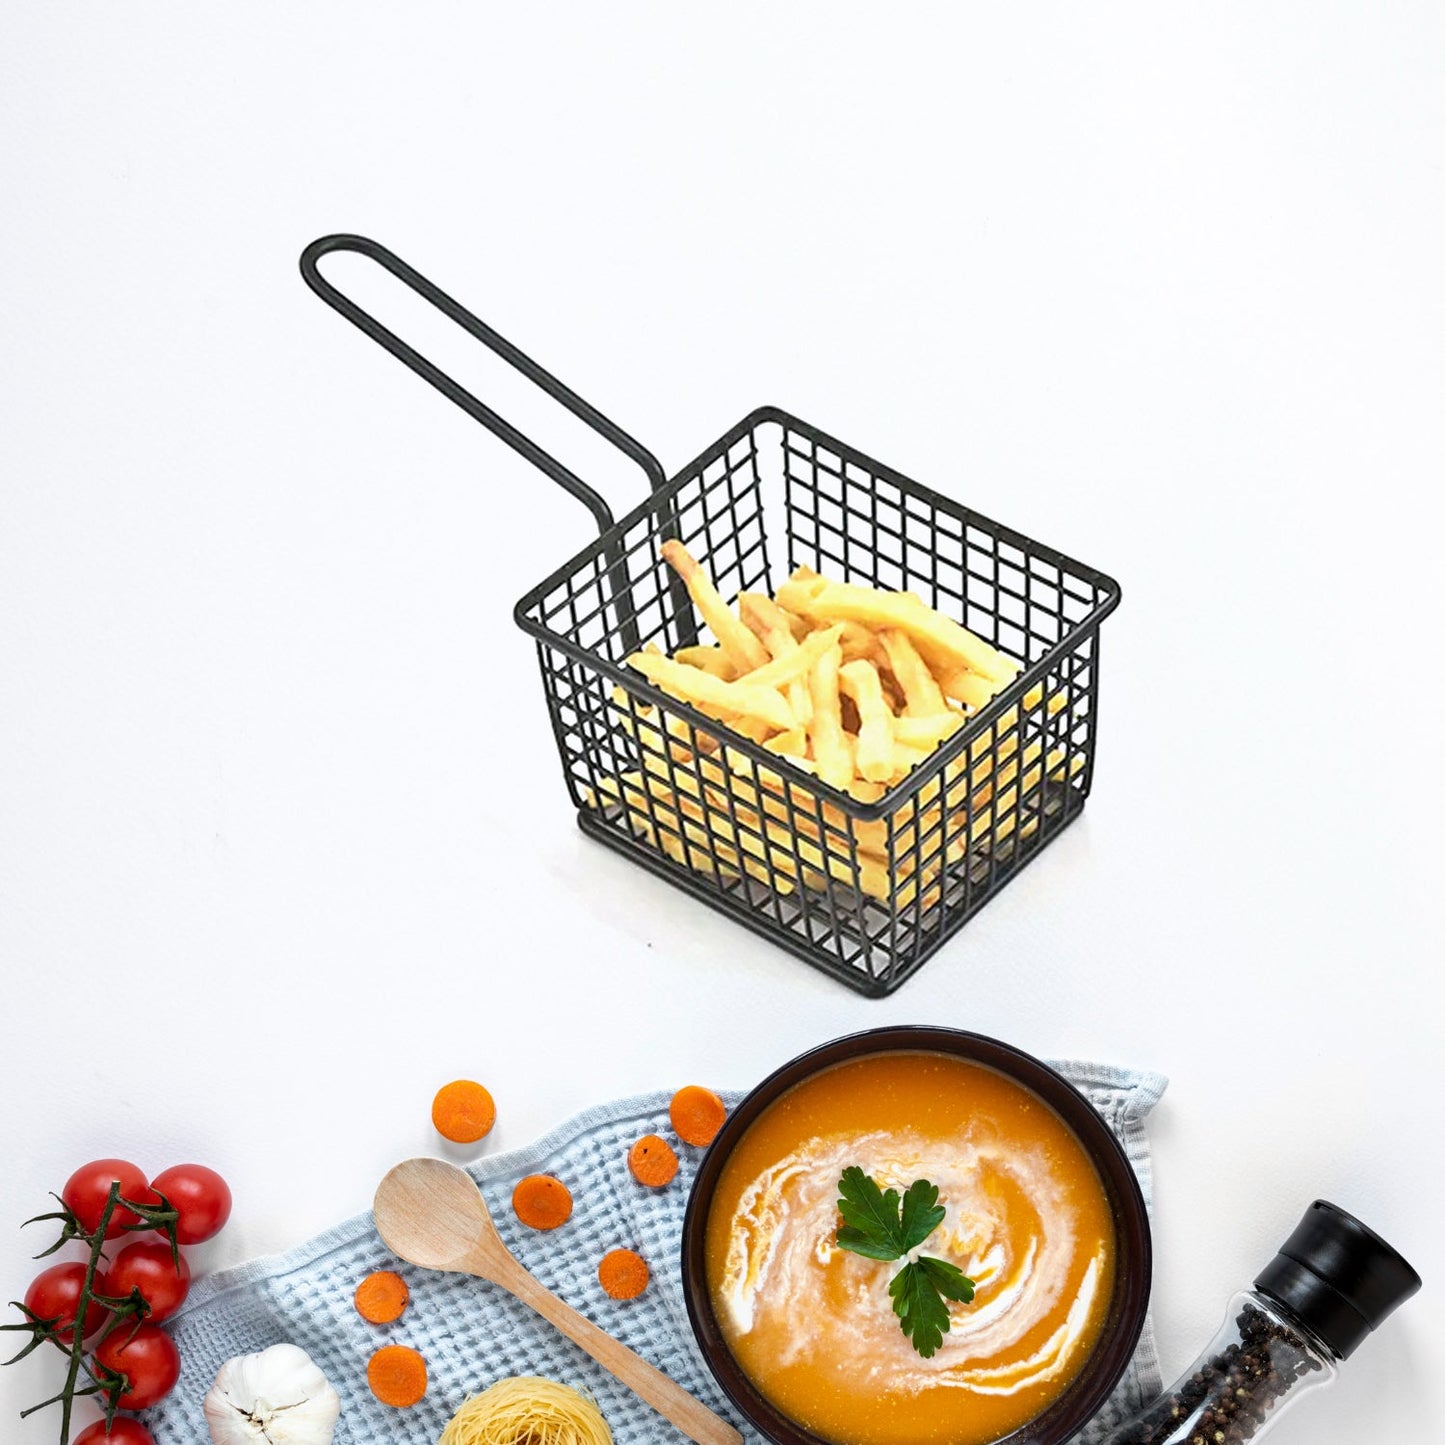 frying baskets for chips Stainless Steel Snack Basket Potato Mesh Strainer Basket French Fries Food Basket Food Strainer Cooking Tools frying basket